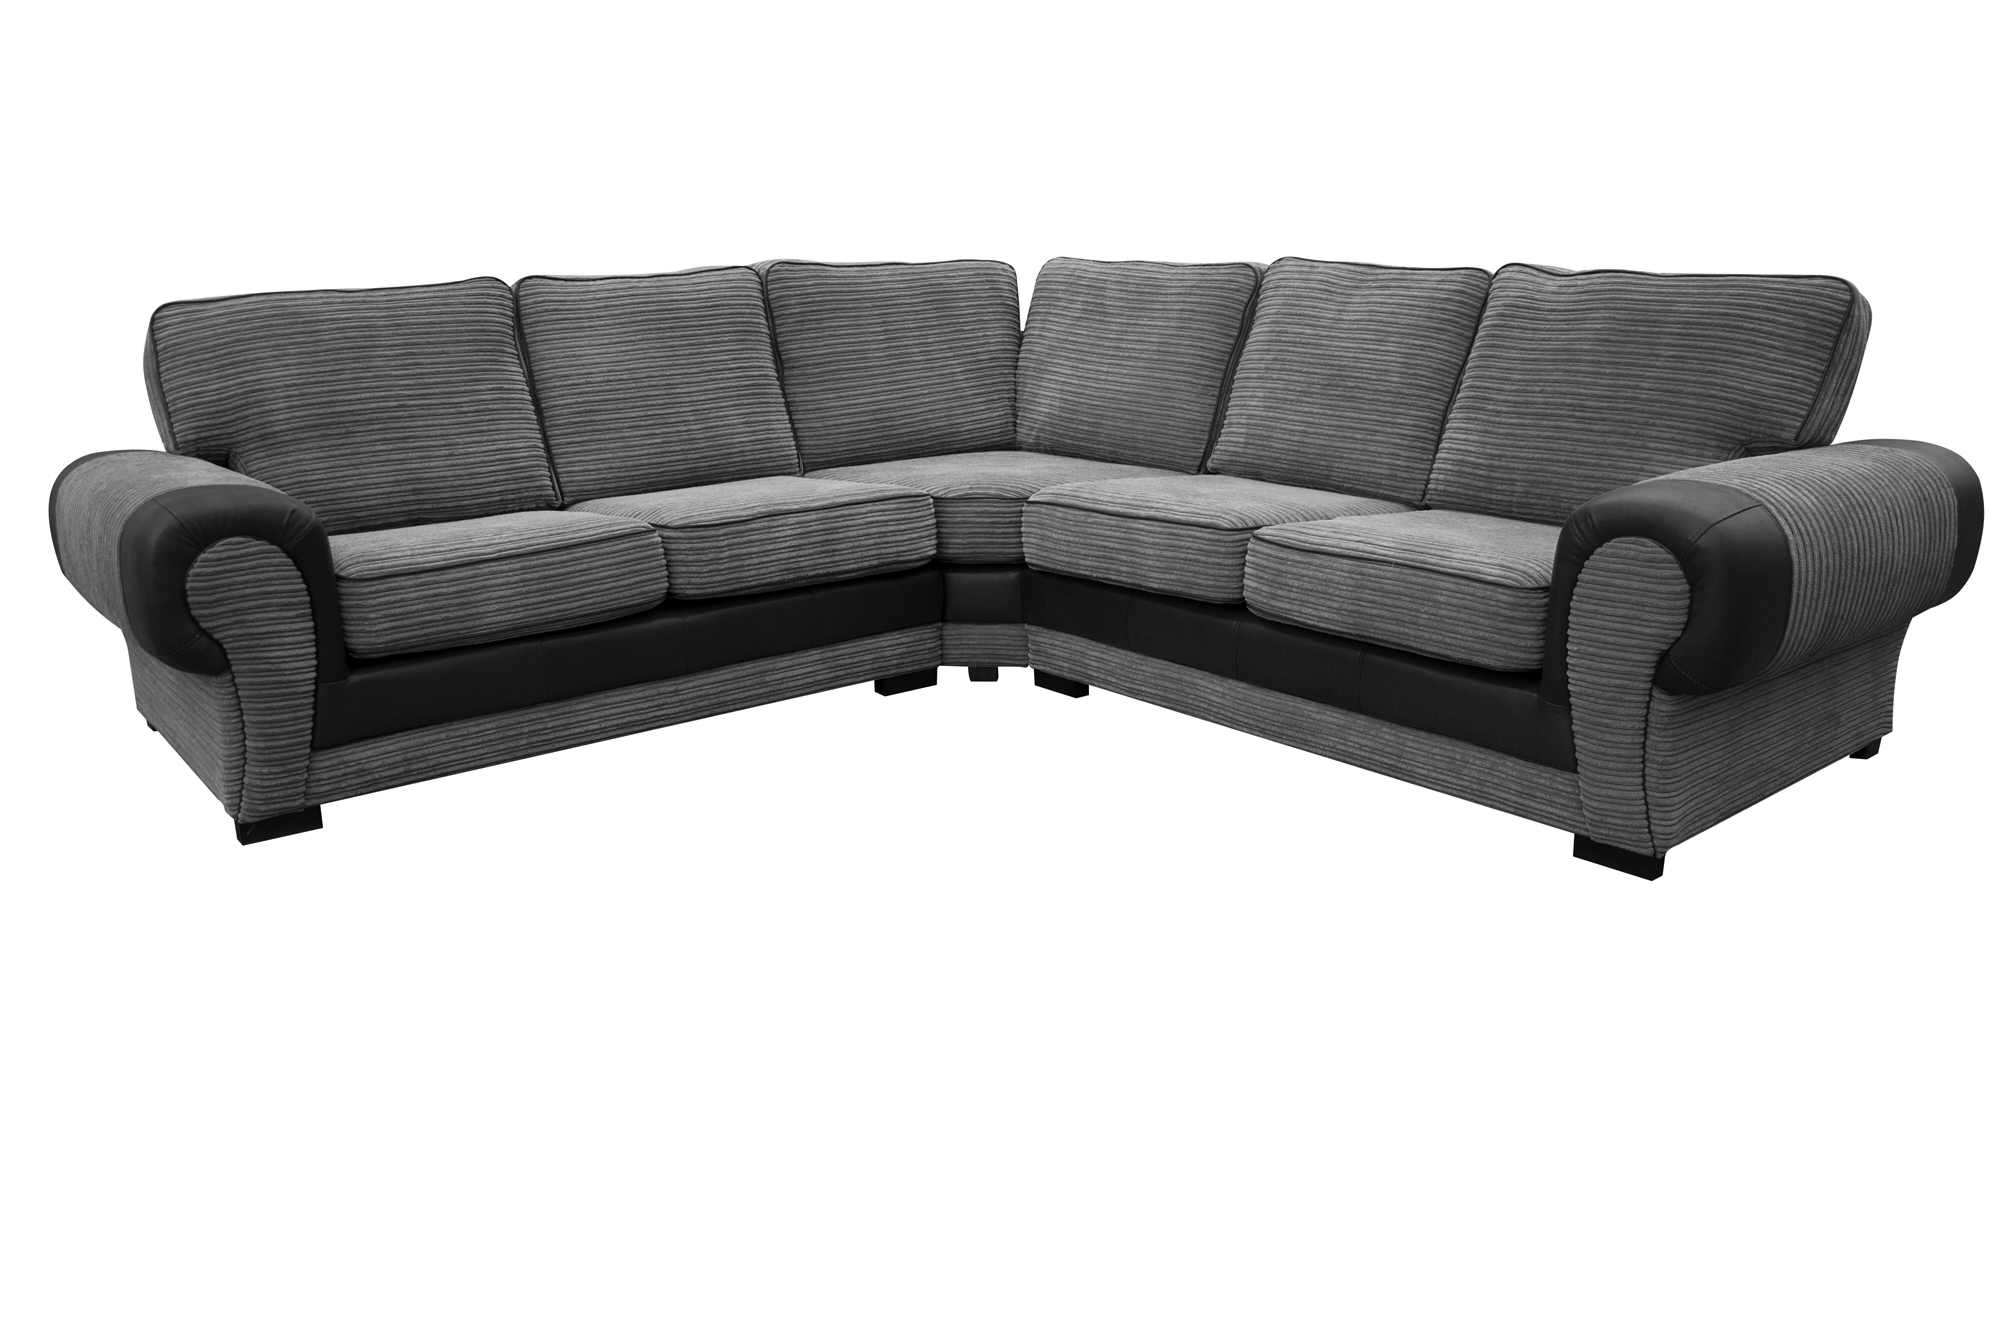 FOOTSTOOL LARGE TANGO CORNER OR 3+2 SEATER SOFA IN BLACK AND GREY